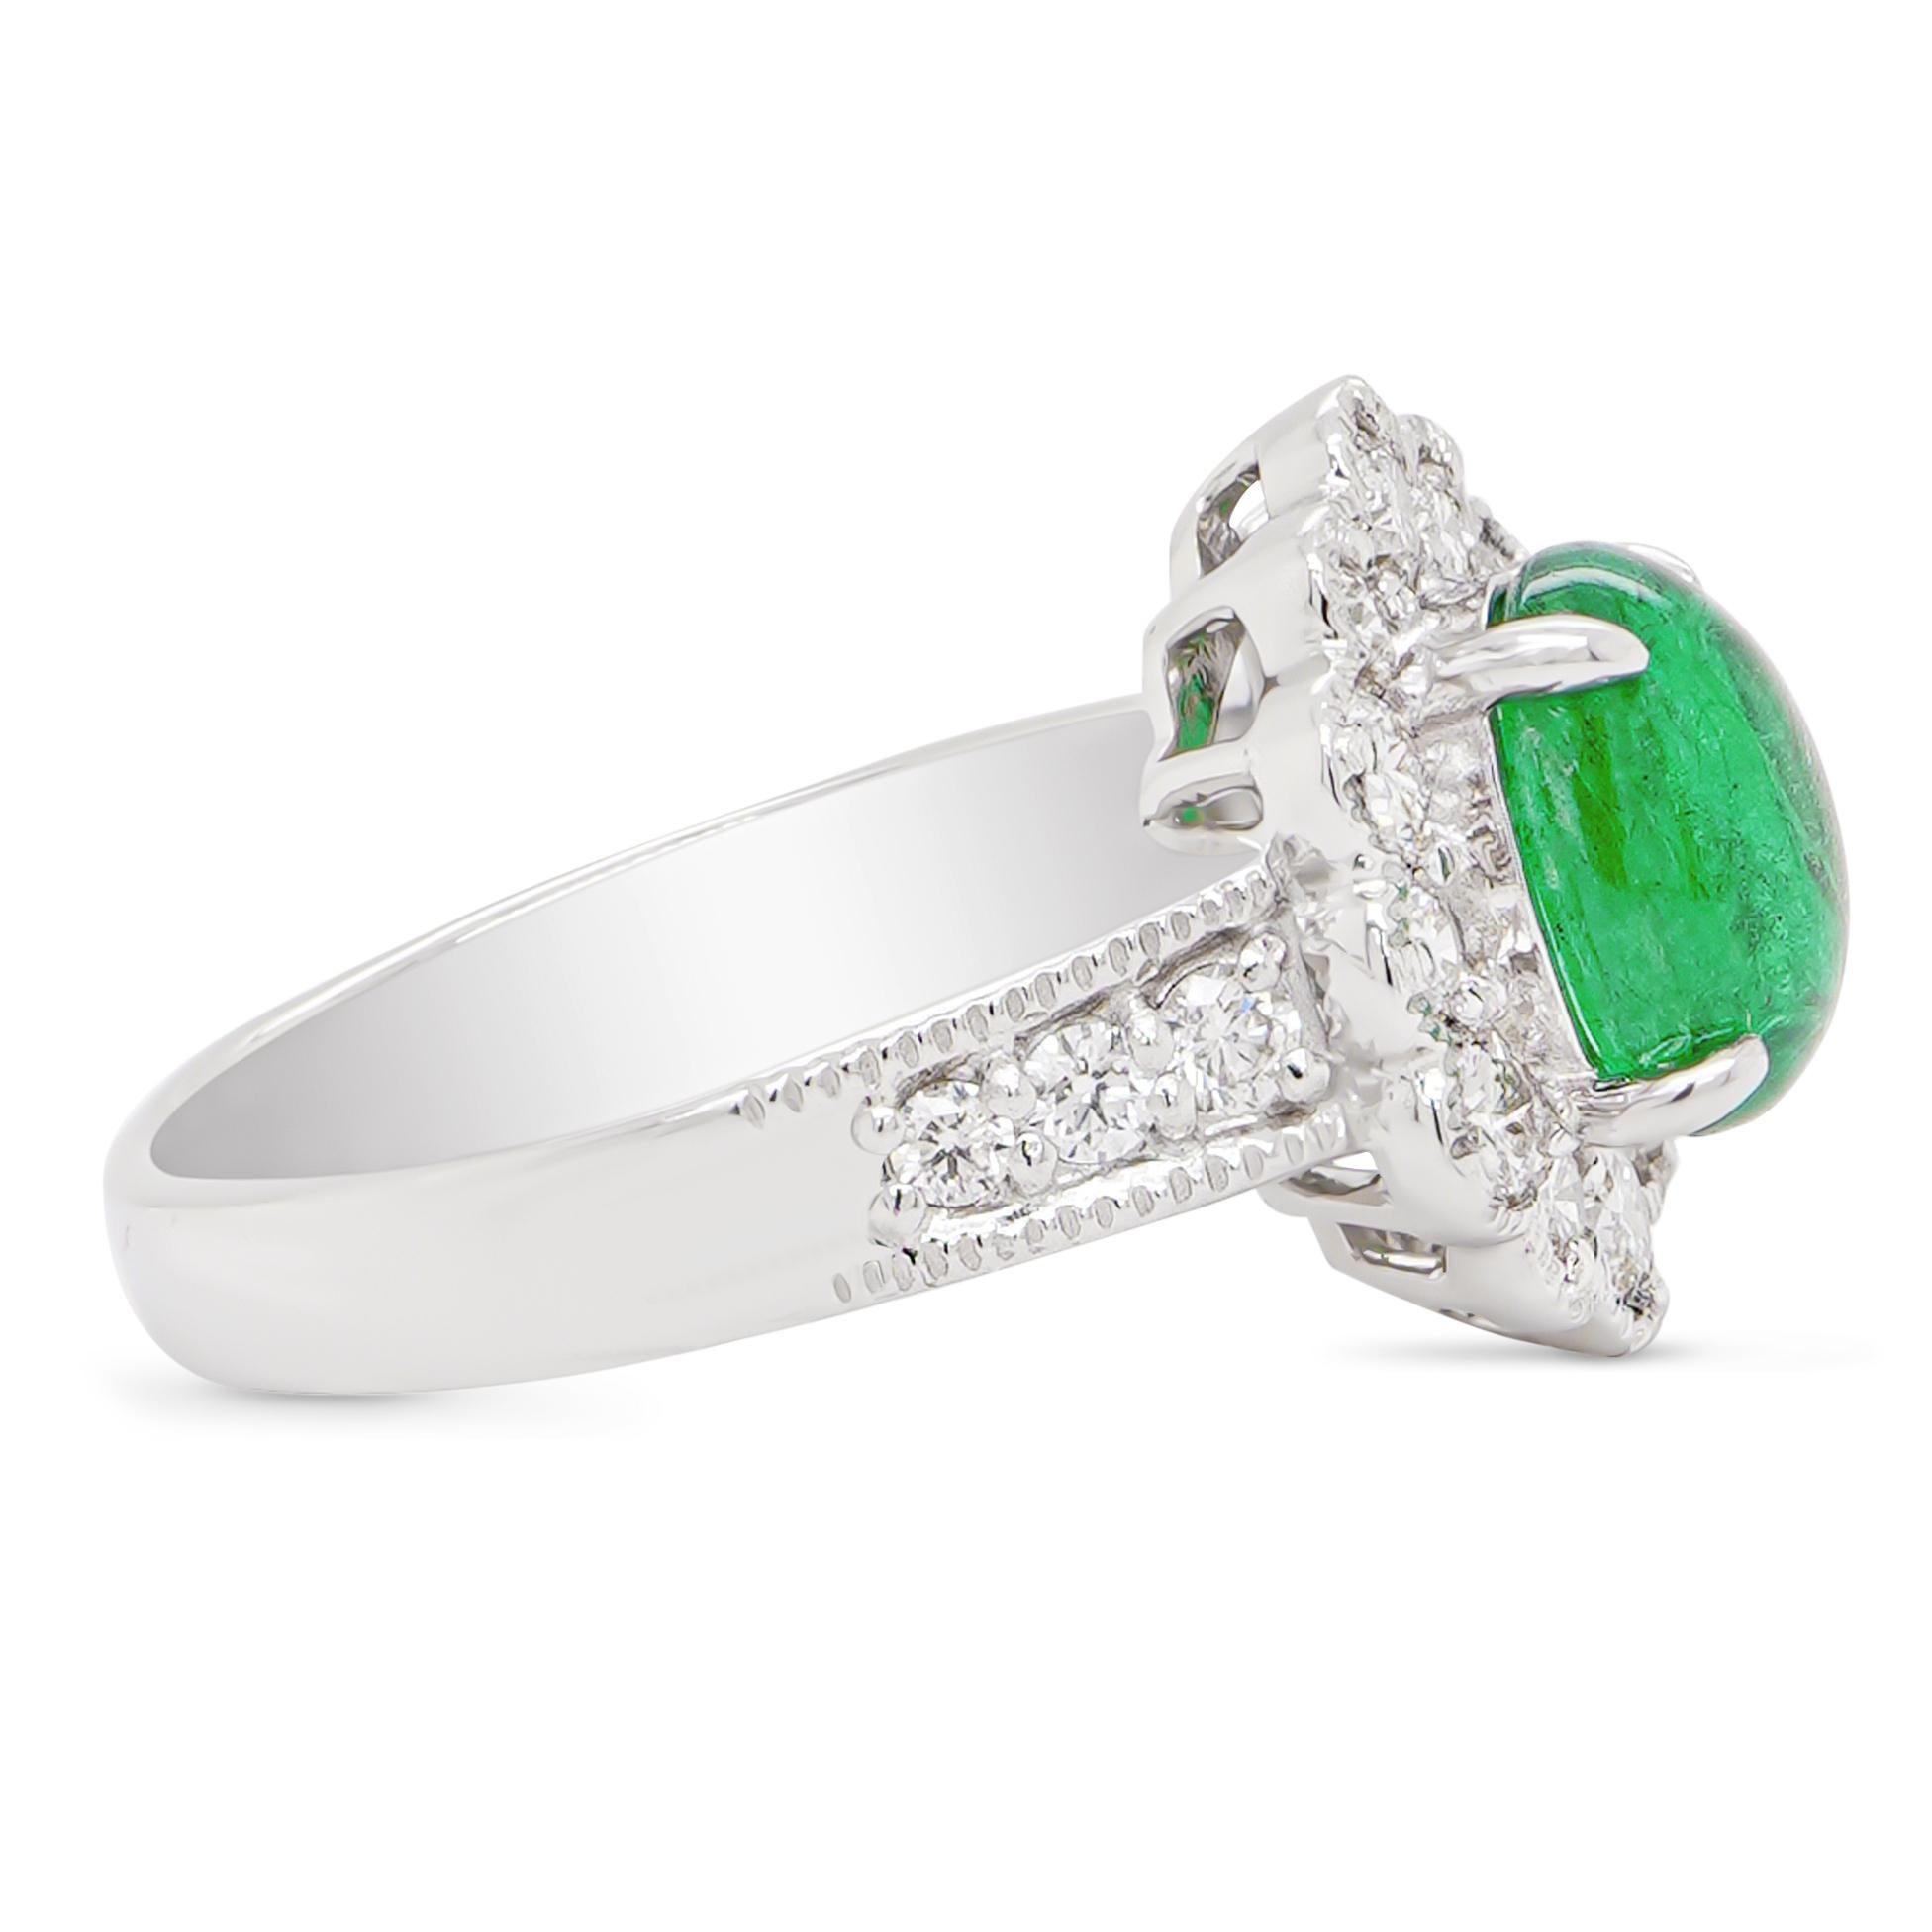 Colombian emeralds tend to have more trace amounts of chromium (called an inclusion) in relation to other emeralds, which typically gives them the pure, bright, saturated green so beloved in these timeless gemstones. Their impressive color stands